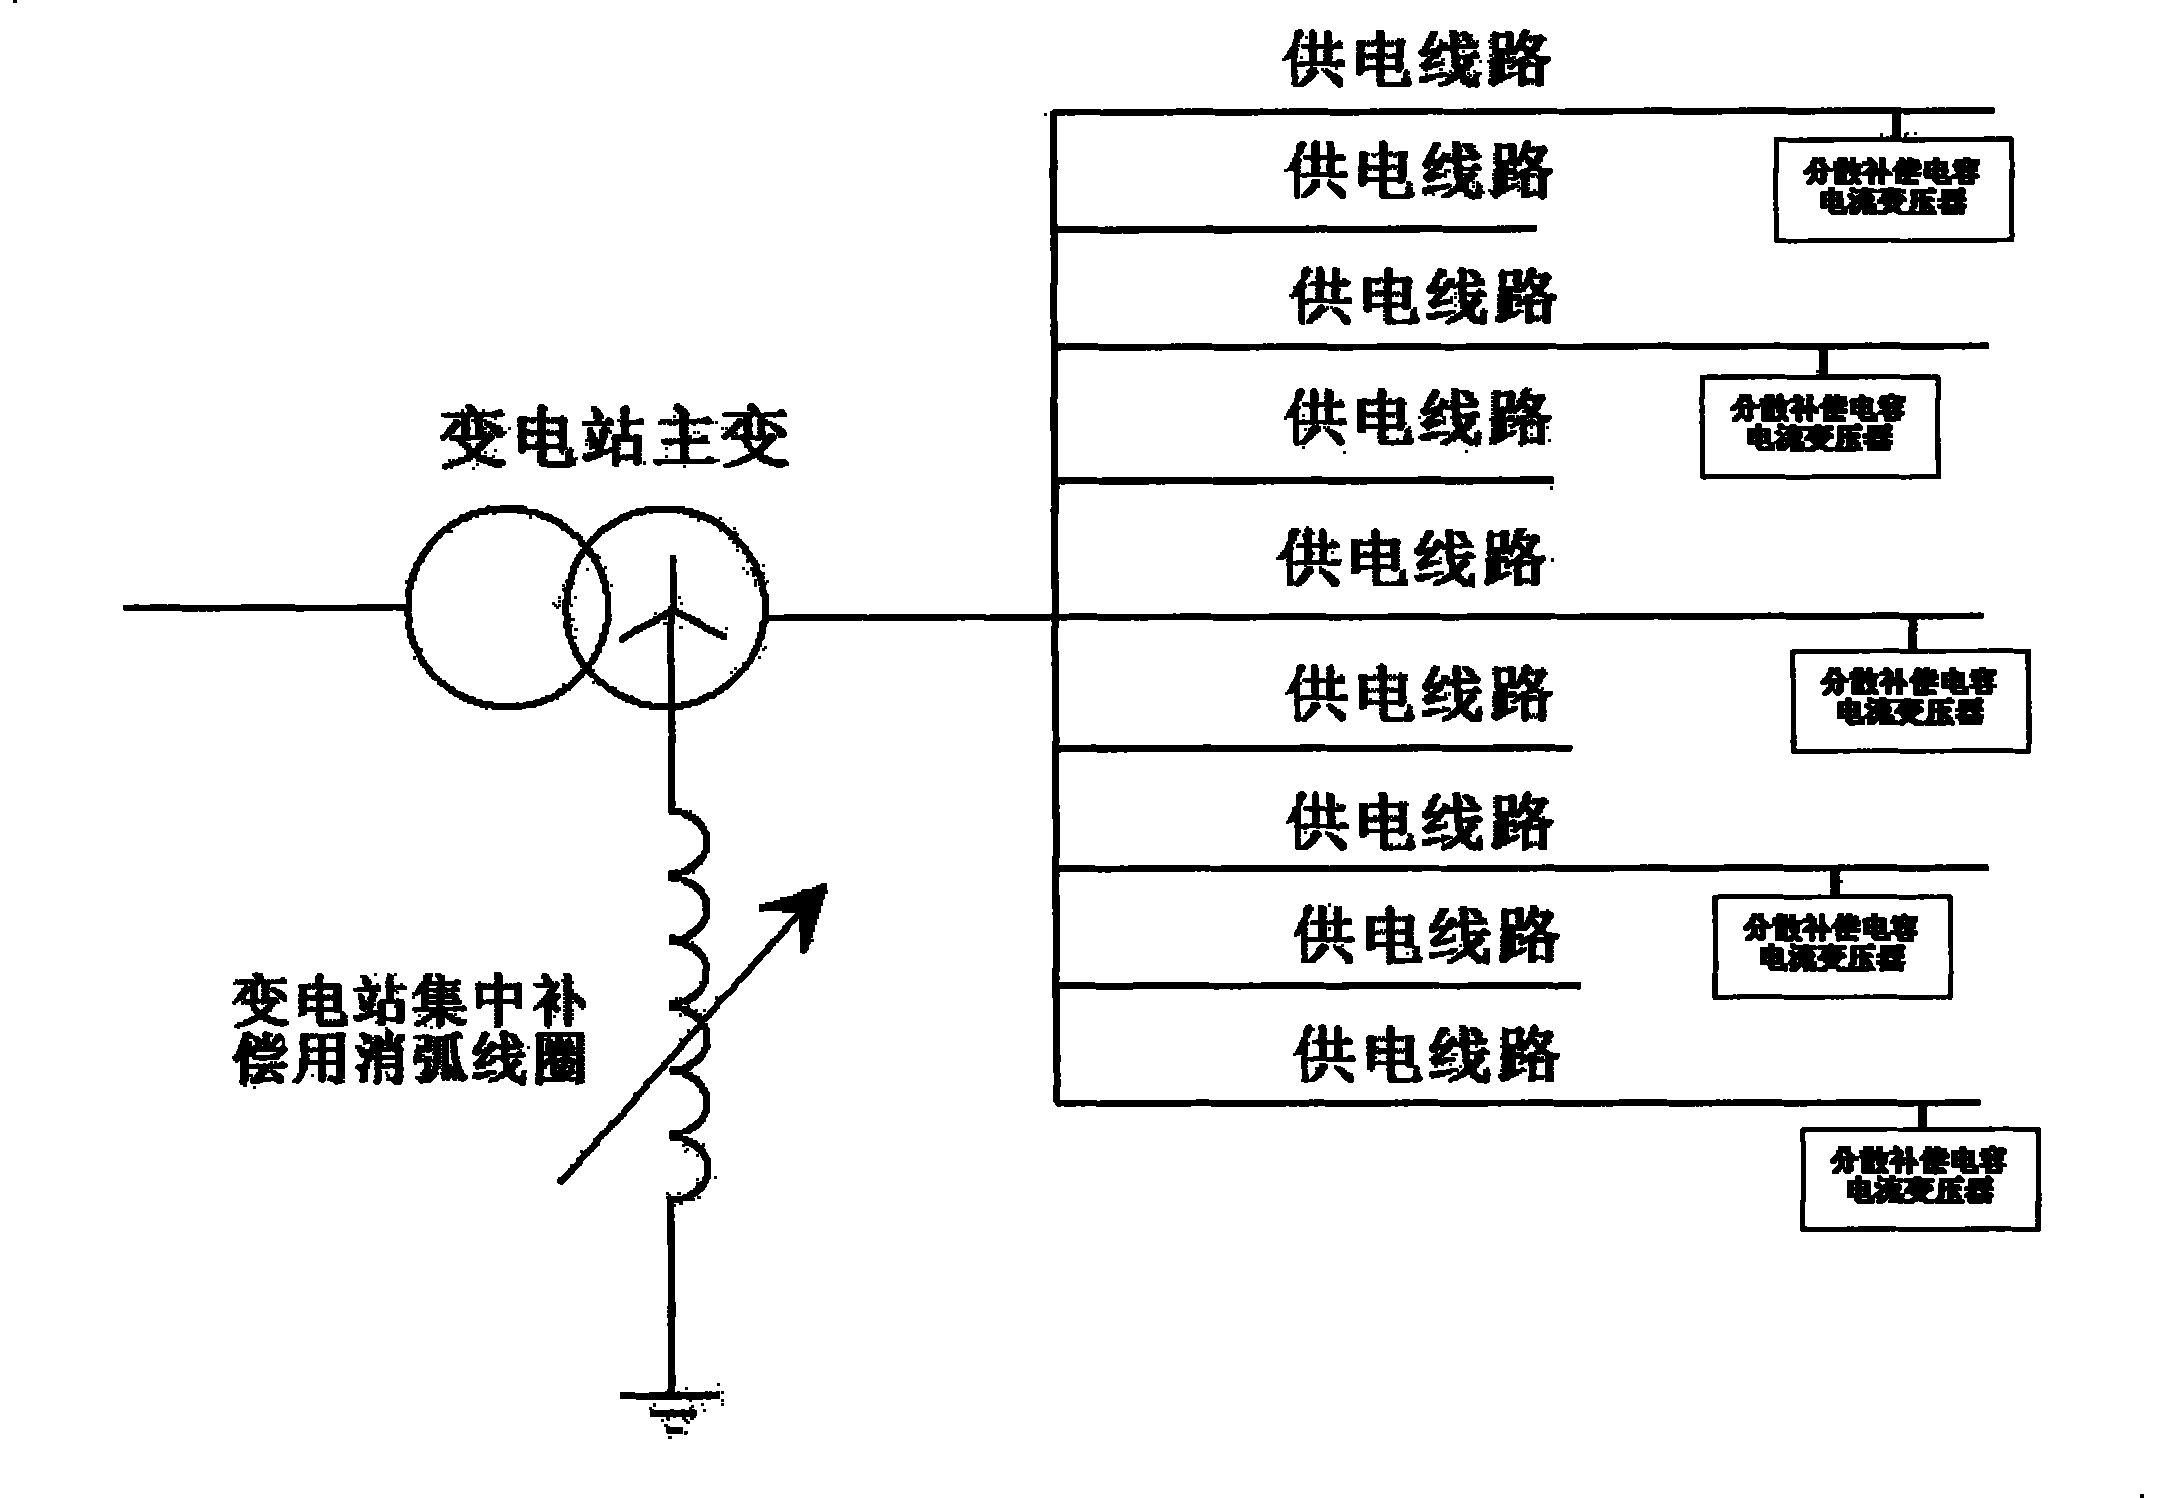 Capacitive grounding current distributed compensation method and device for medium-voltage power supply system